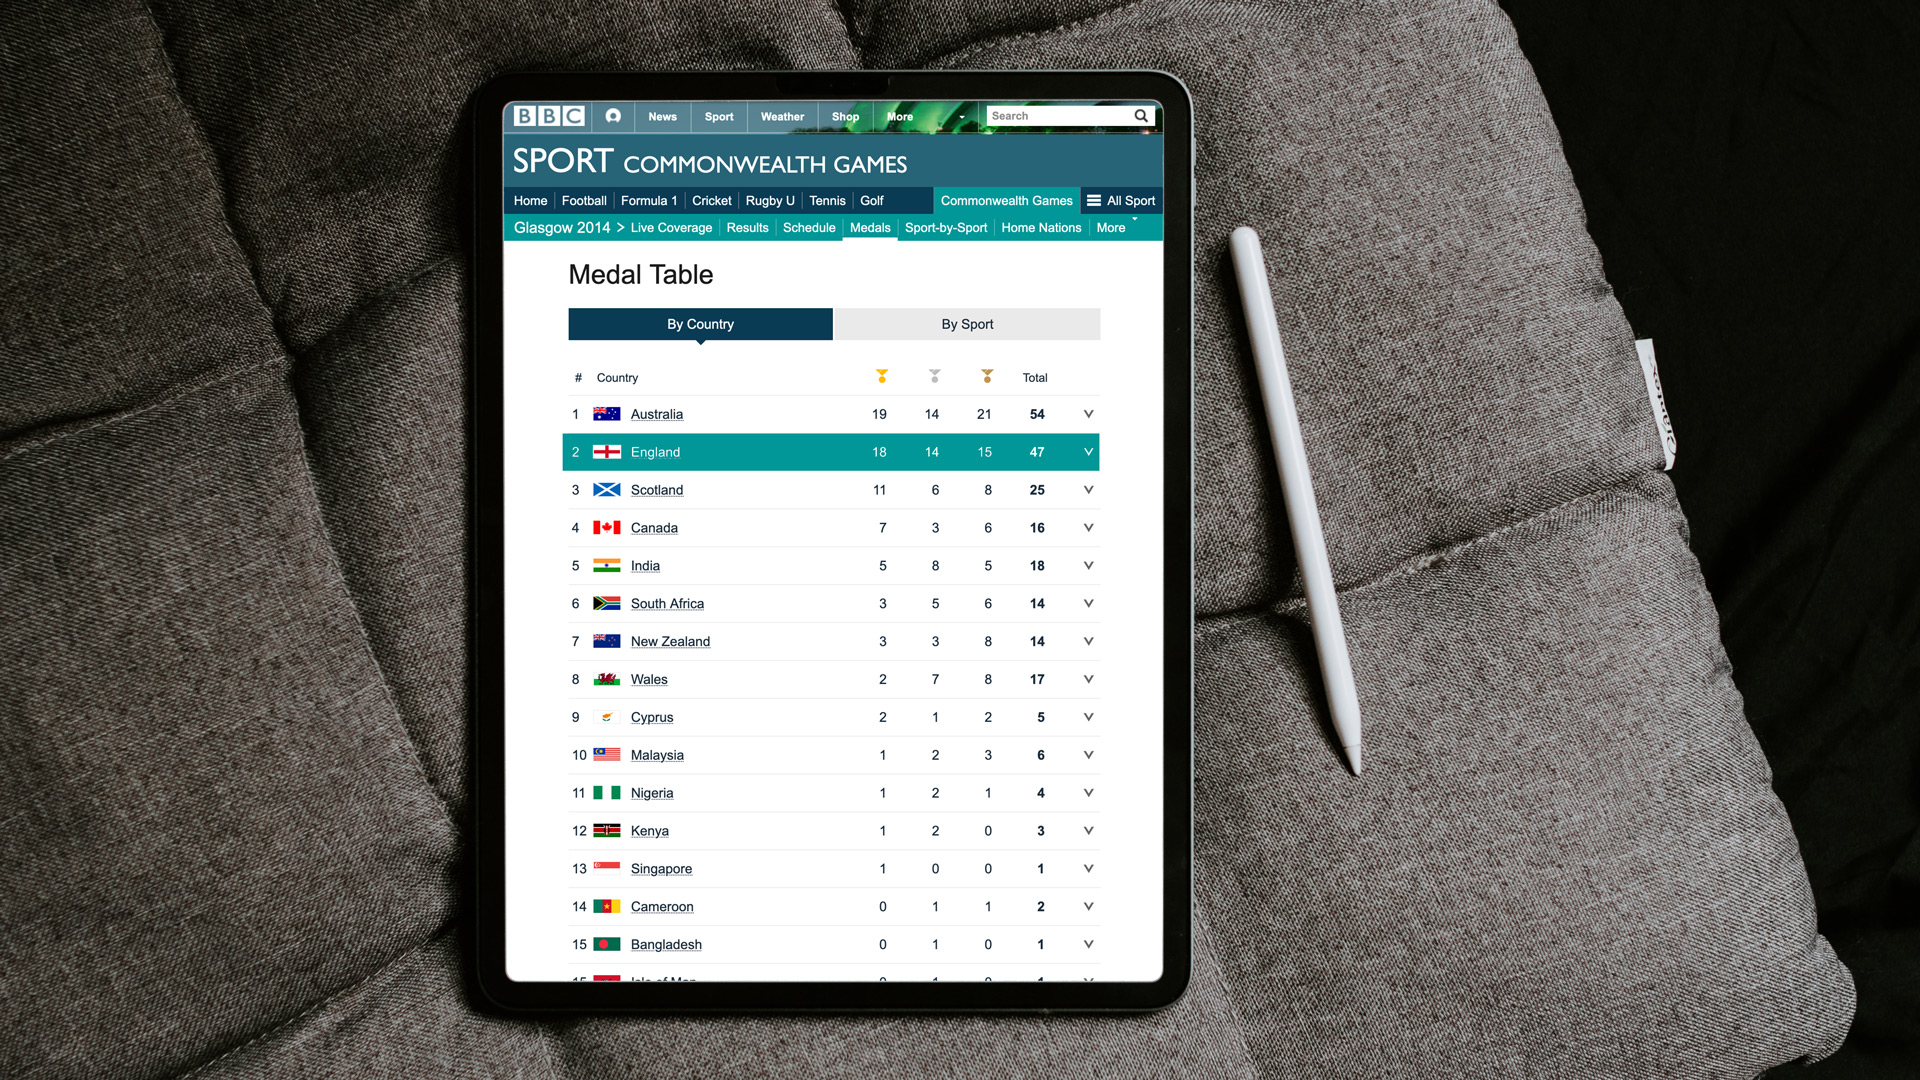 A zoomed-in photograph shows a tablet device and pencil resting on a grey sofa. The tablet screen has the Commonwealth Games medal table open on it. The row that shows England is highlighted in a teal colour, depicting the user's home country. 